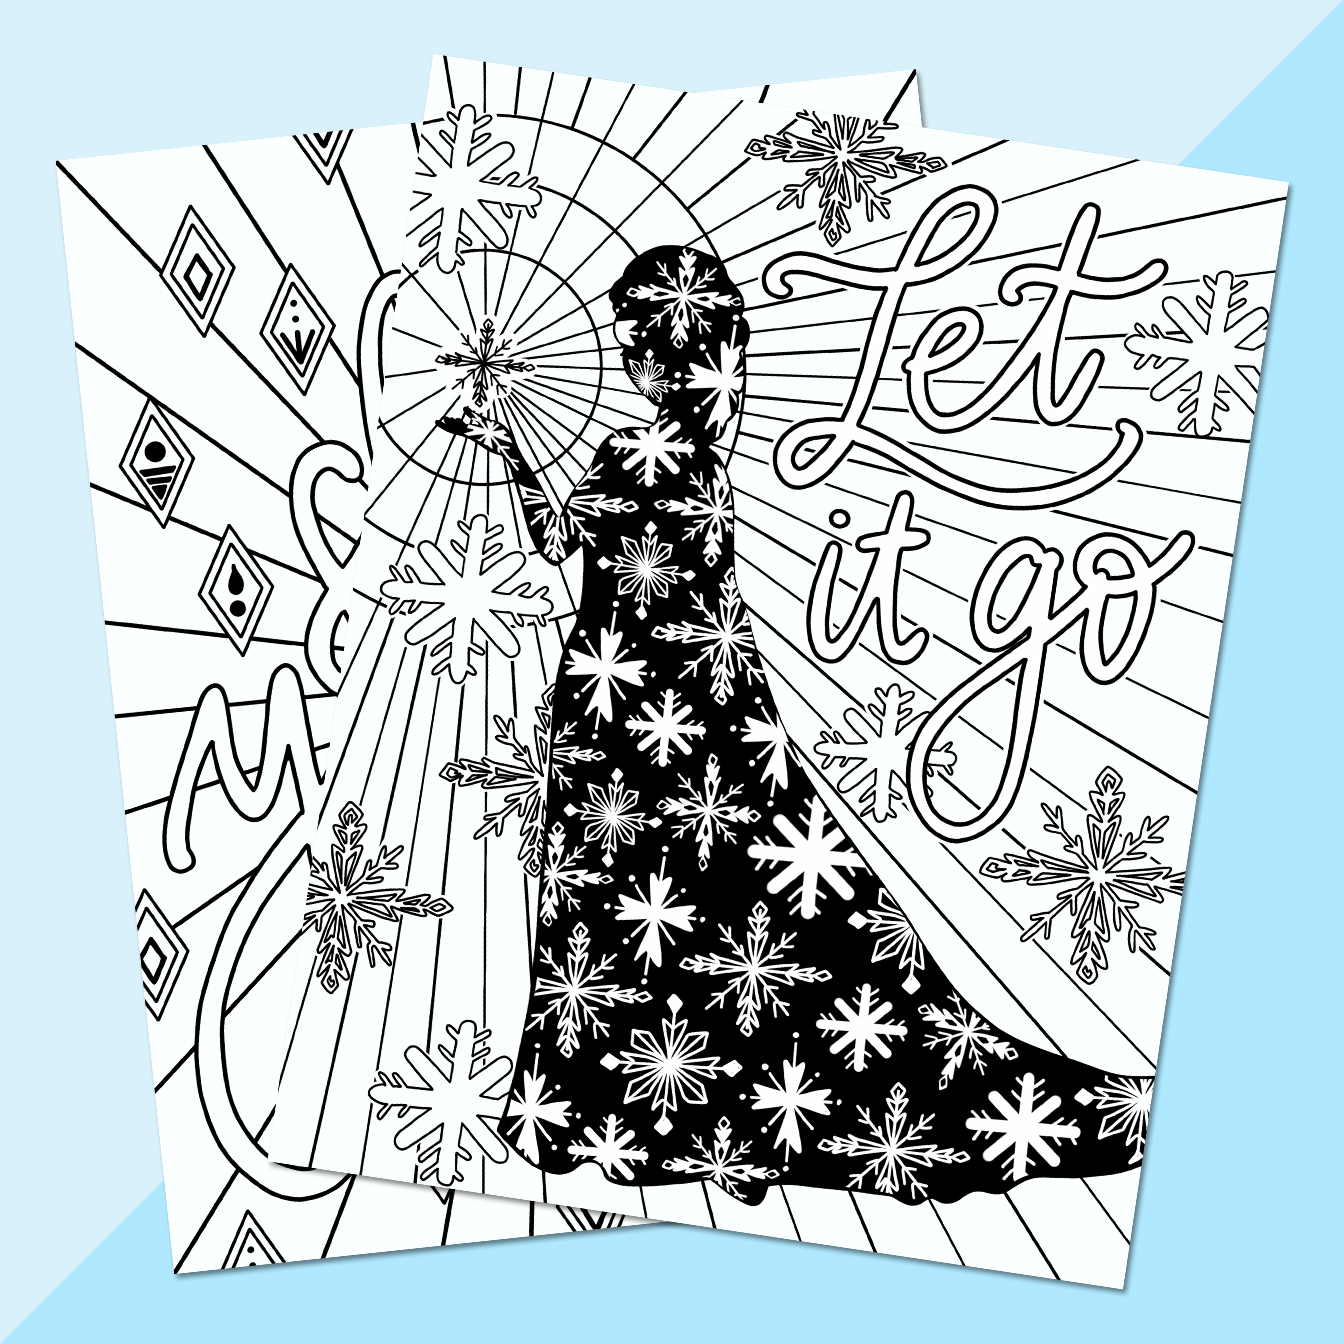 Free Printable Elsa Coloring Pages